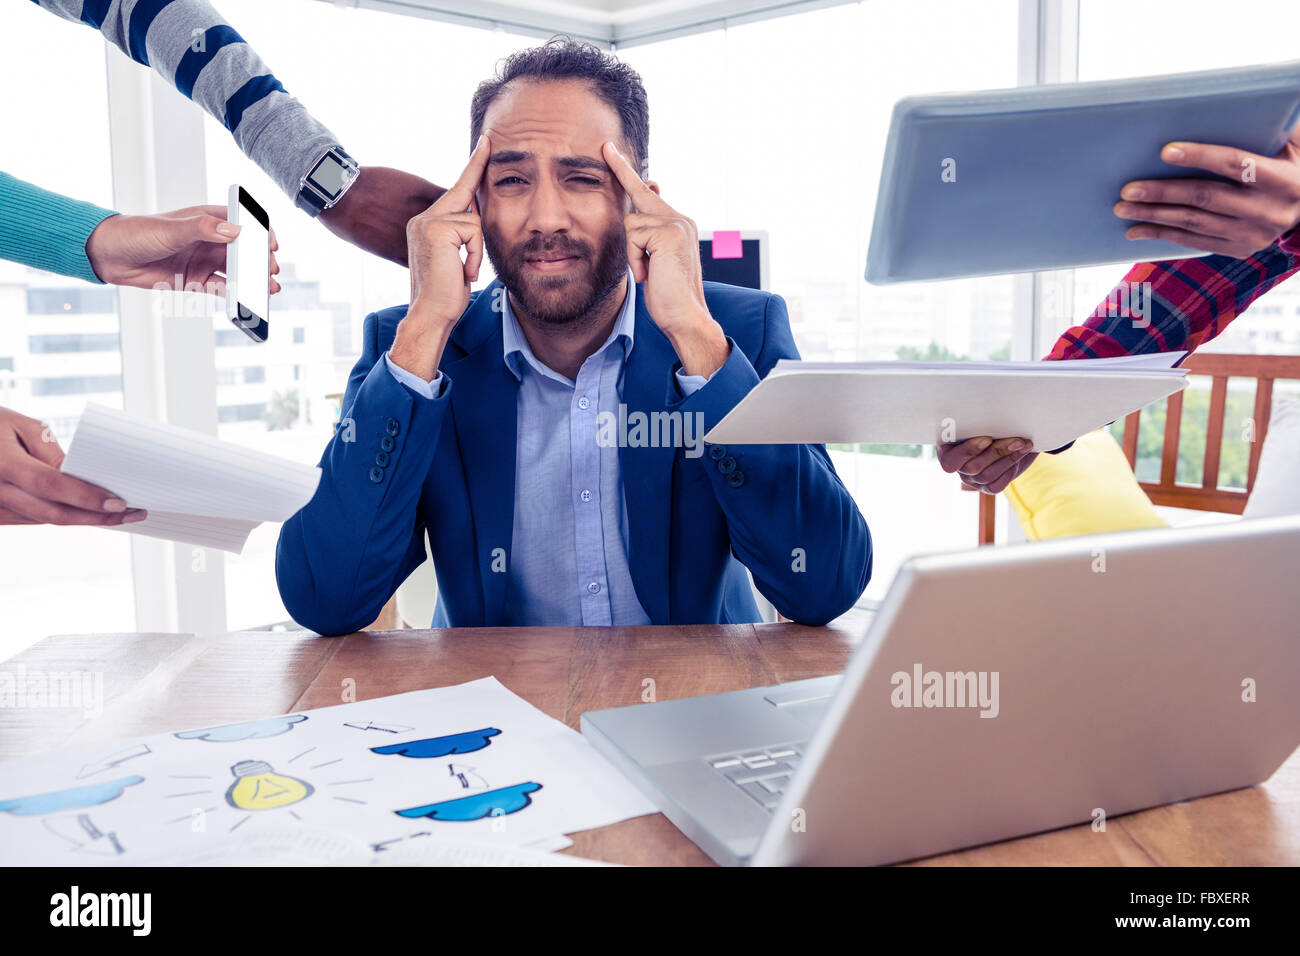 Stressful businessman by colleagues in creative office Stock Photo